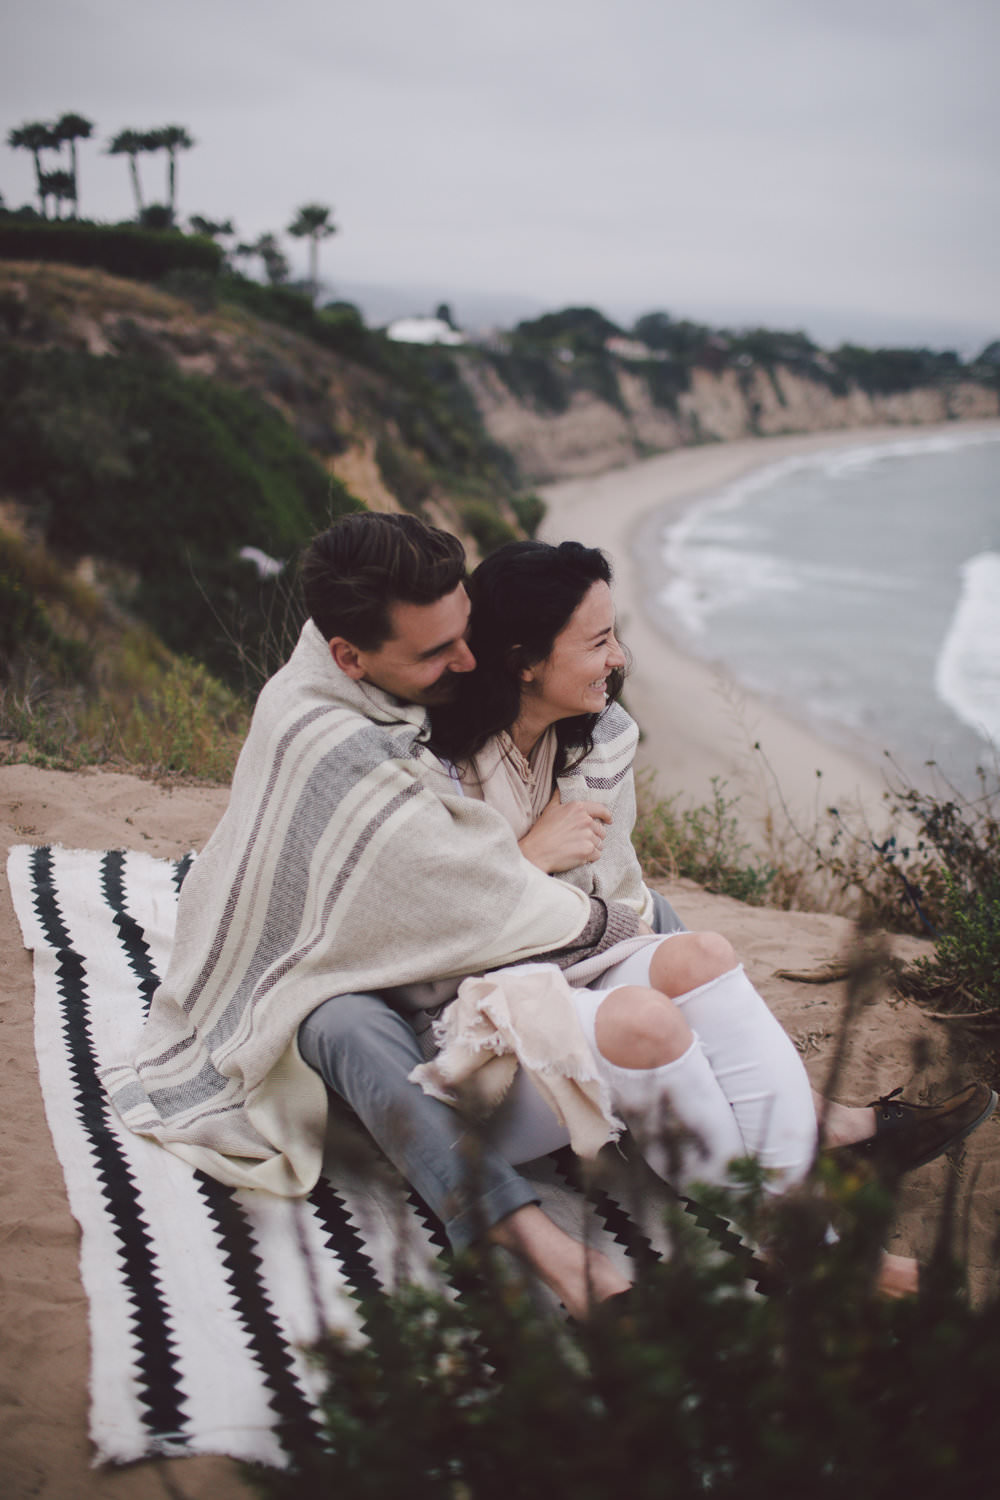  Micro wedding, point dume, point dume elopement, elope in los angeles, california elopement, adventure elopement, california elopement ideas, sunrise elopement, elopements on the beach, moody wedding photos, california elopement packages, malibu elopement, malibu wedding, malibu engagement photos, adventure elopement dress, adventure elopement ideas, sunrise beach elopement, sustainable wedding ideas, small beach wedding, destination wedding, adventure elopement photographer, elopement blanket 